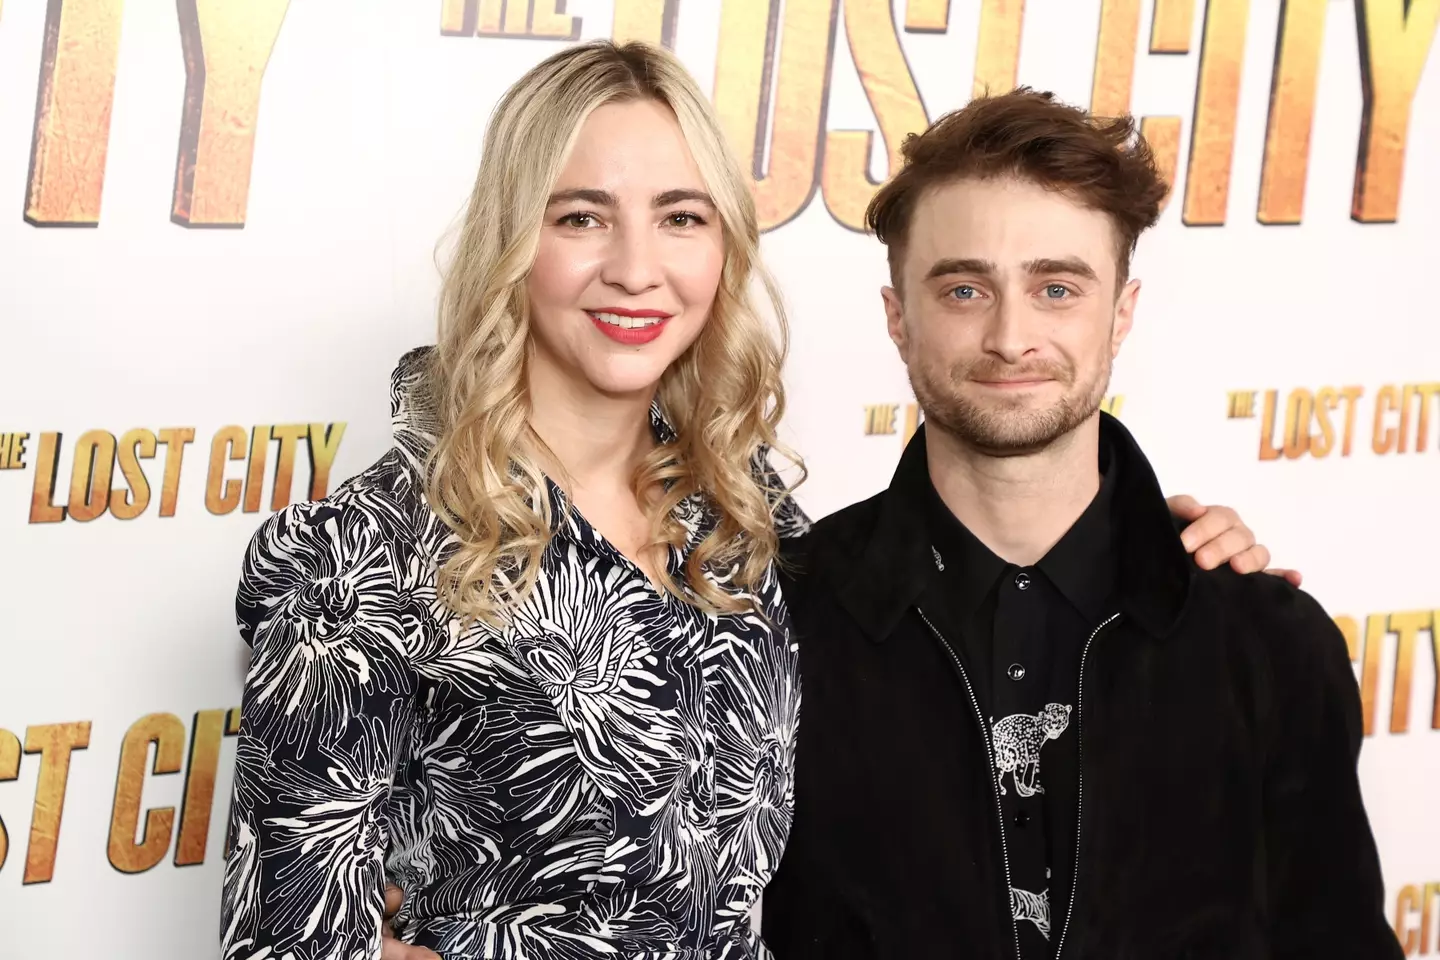 Daniel Radcliffe and Erin Darke welcomed their first child earlier this year.